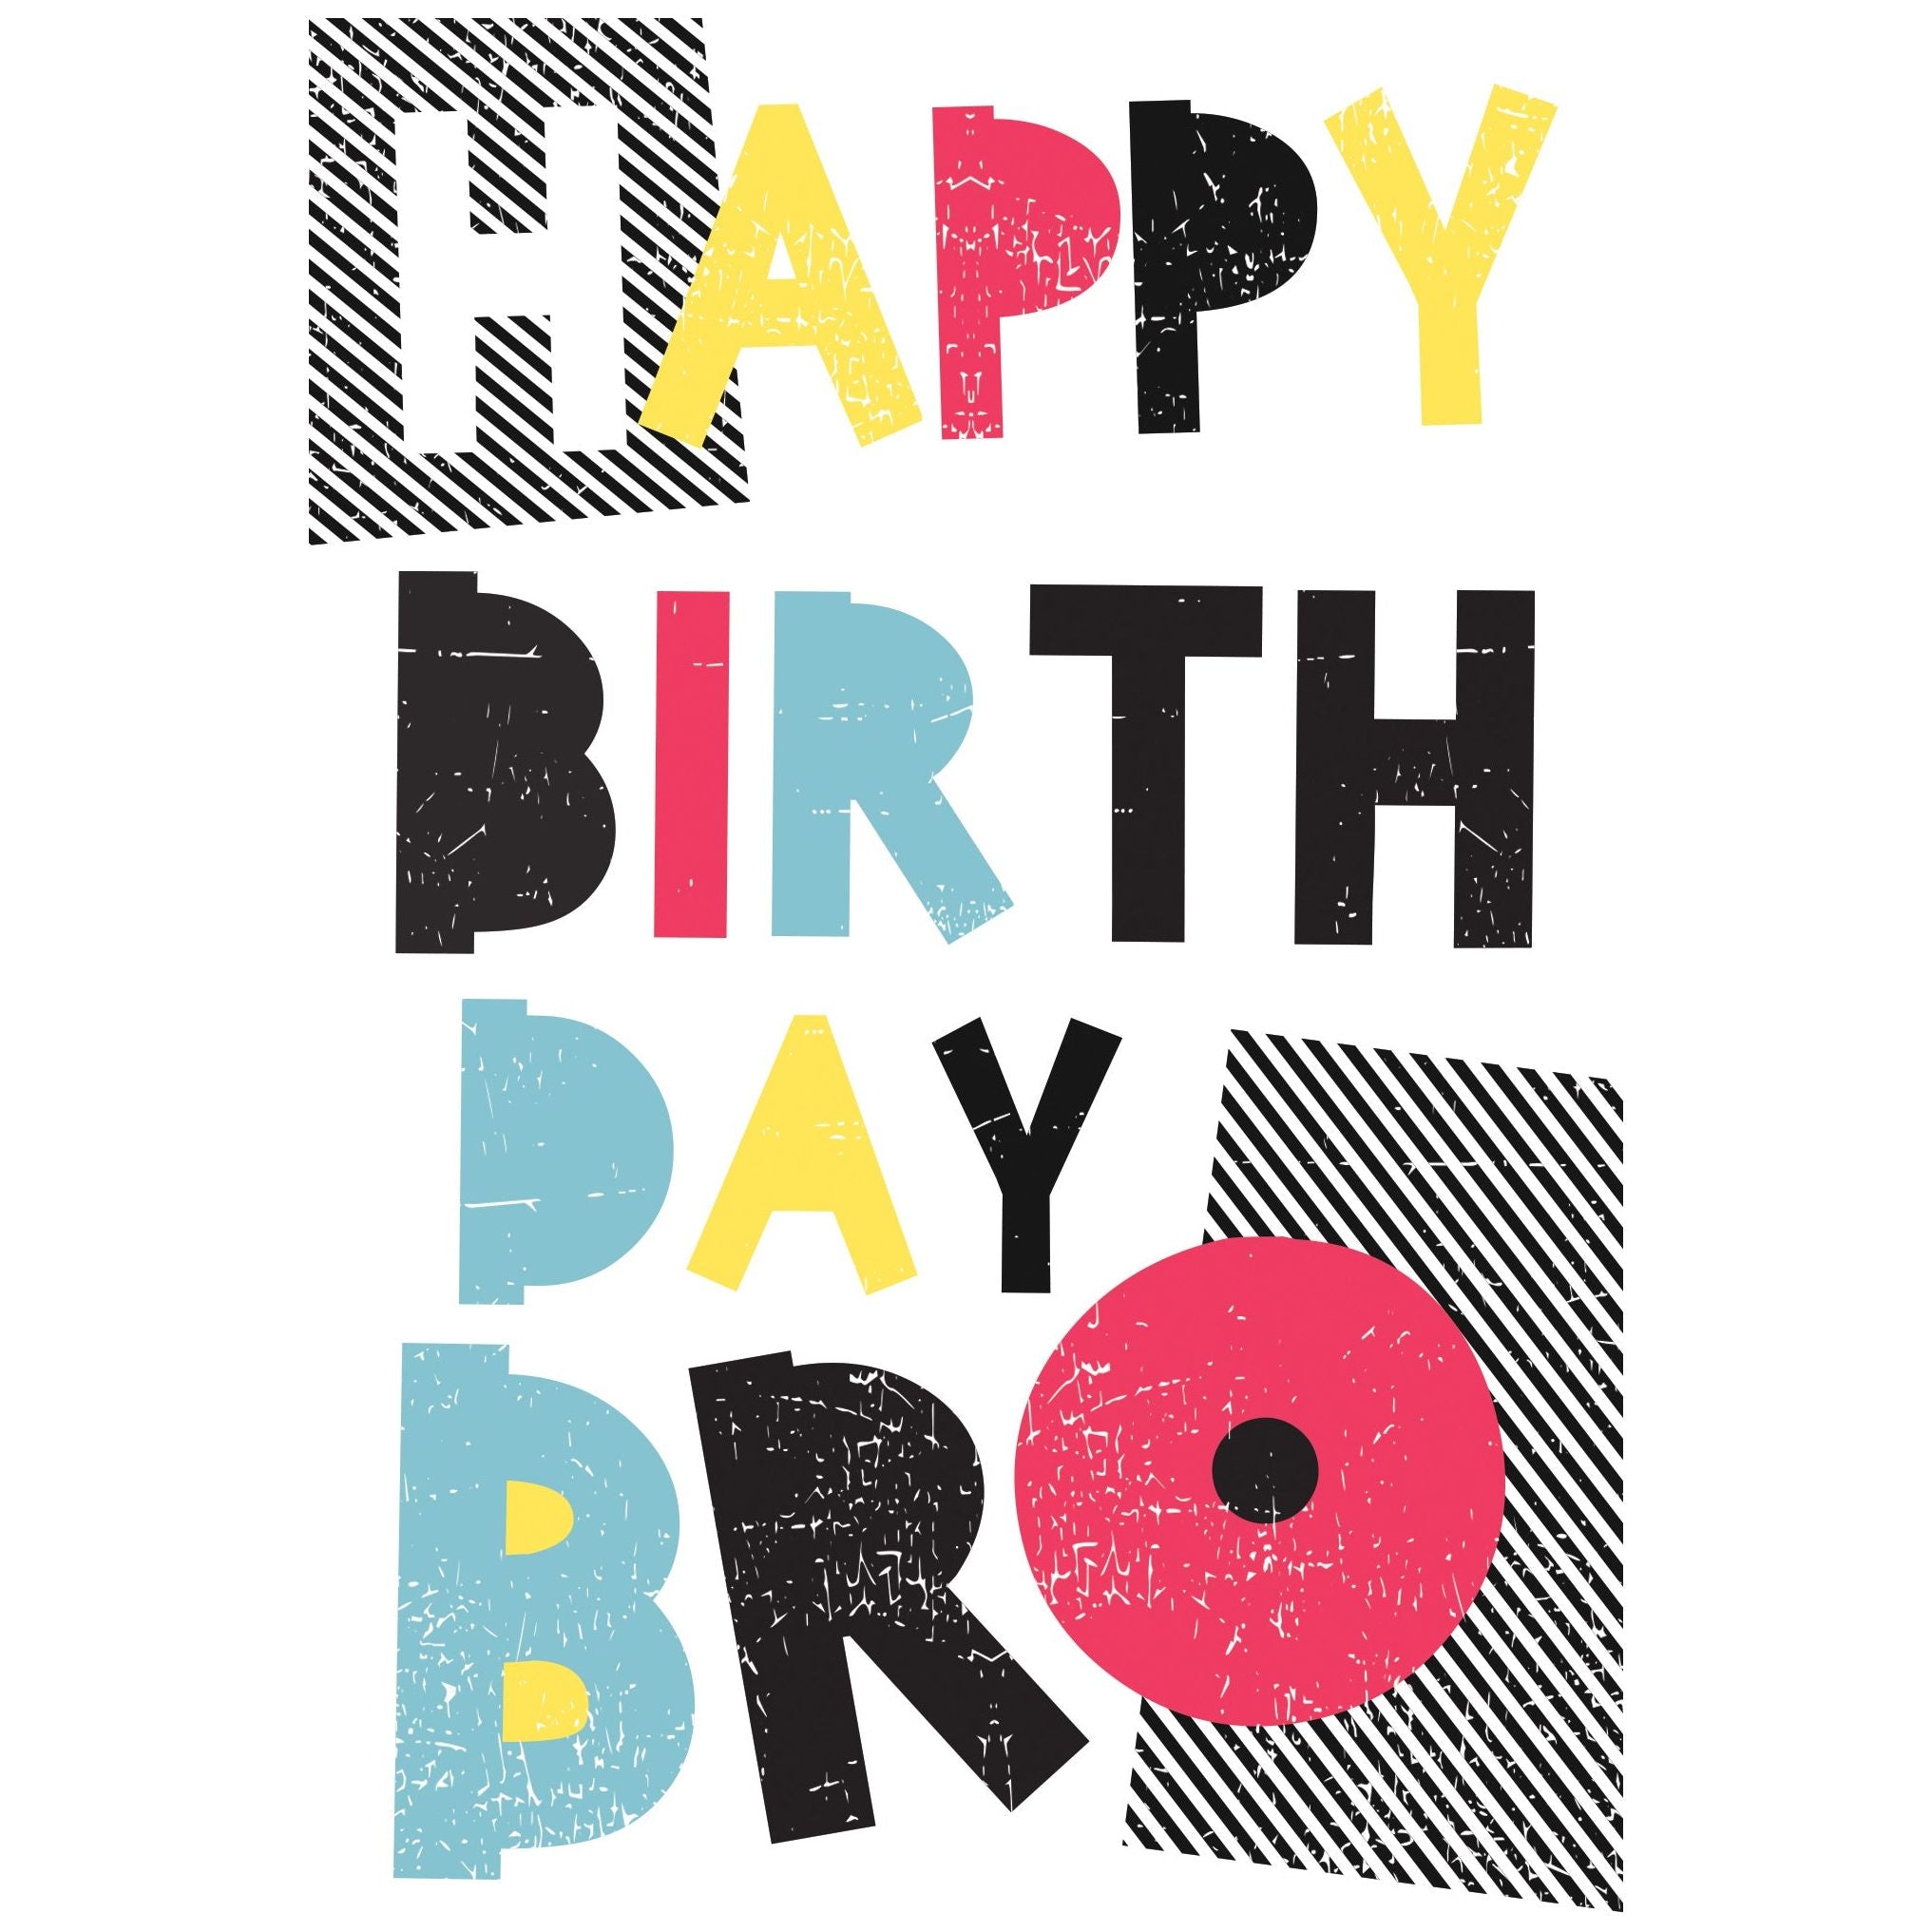 brother birthday cards greetings